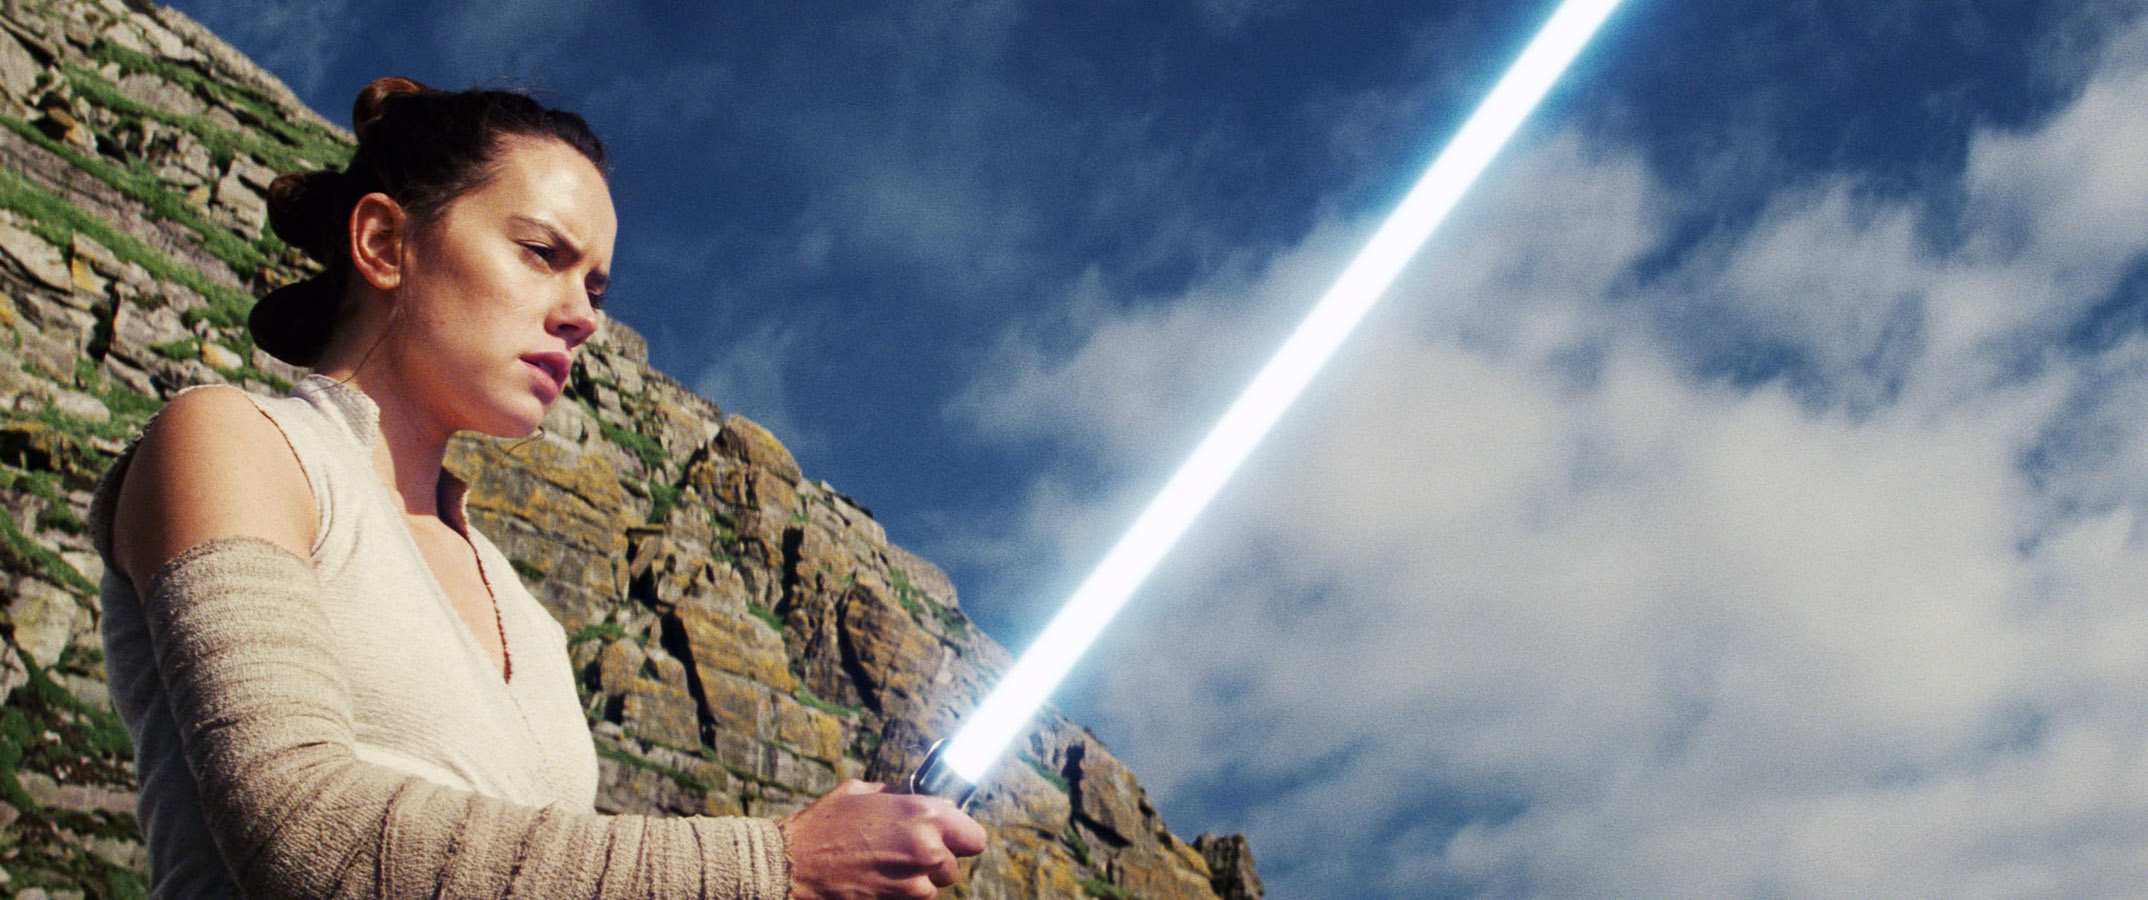 Rey from Star Wars holds a lightsaber on a rocky terrain, looking focused